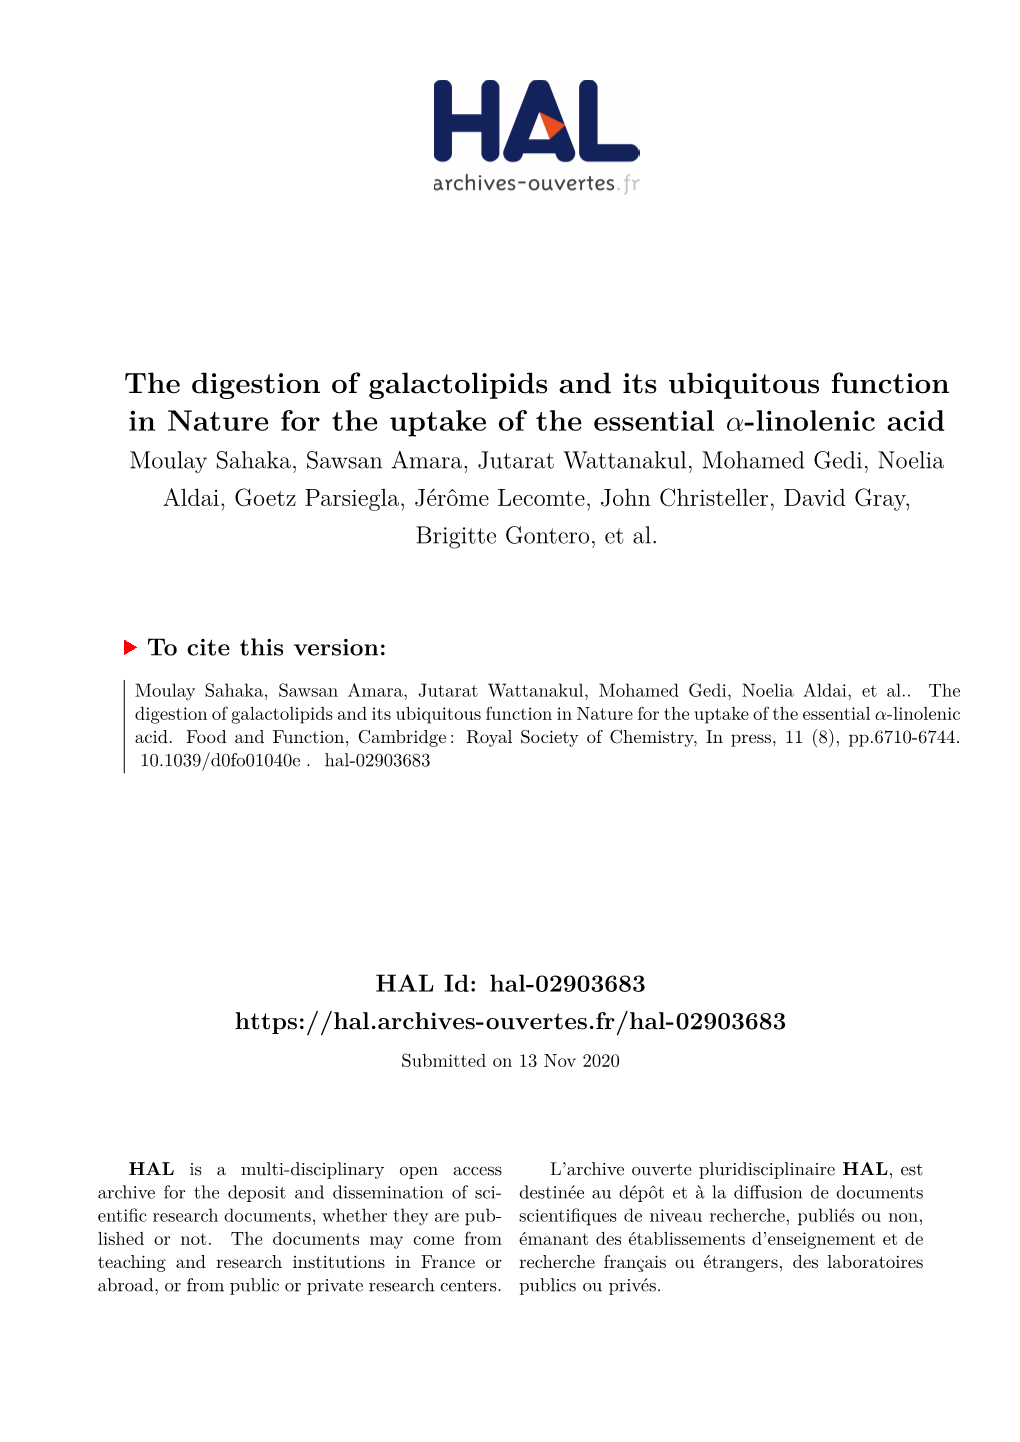 The Digestion of Galactolipids and Its Ubiquitous